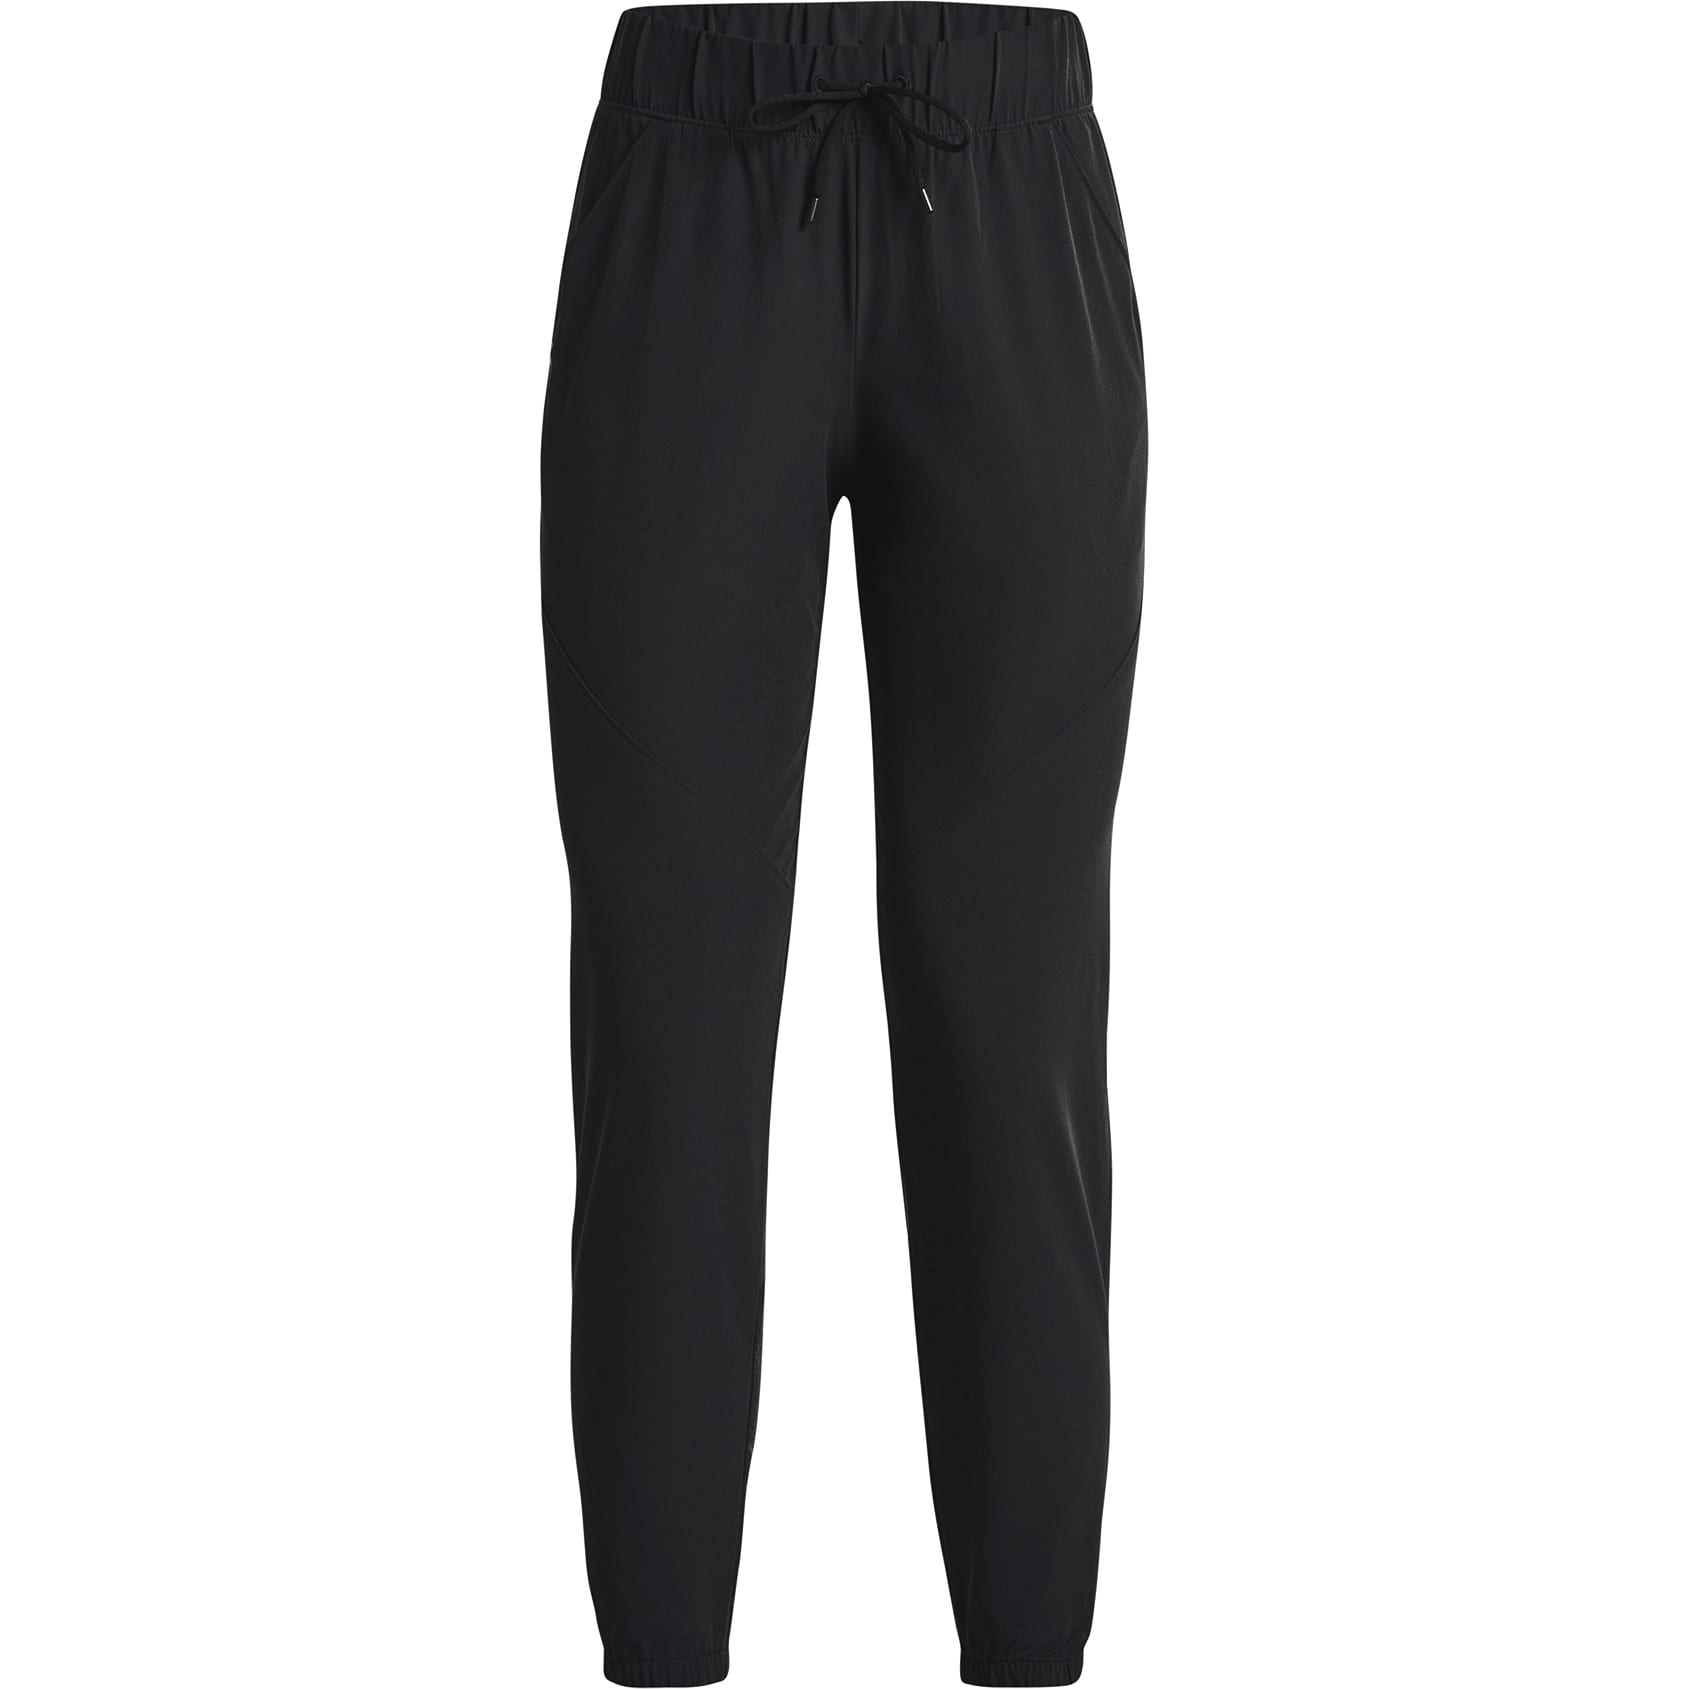 Heat Holders Women's Thermal Tights HHL03 – Good's Store Online